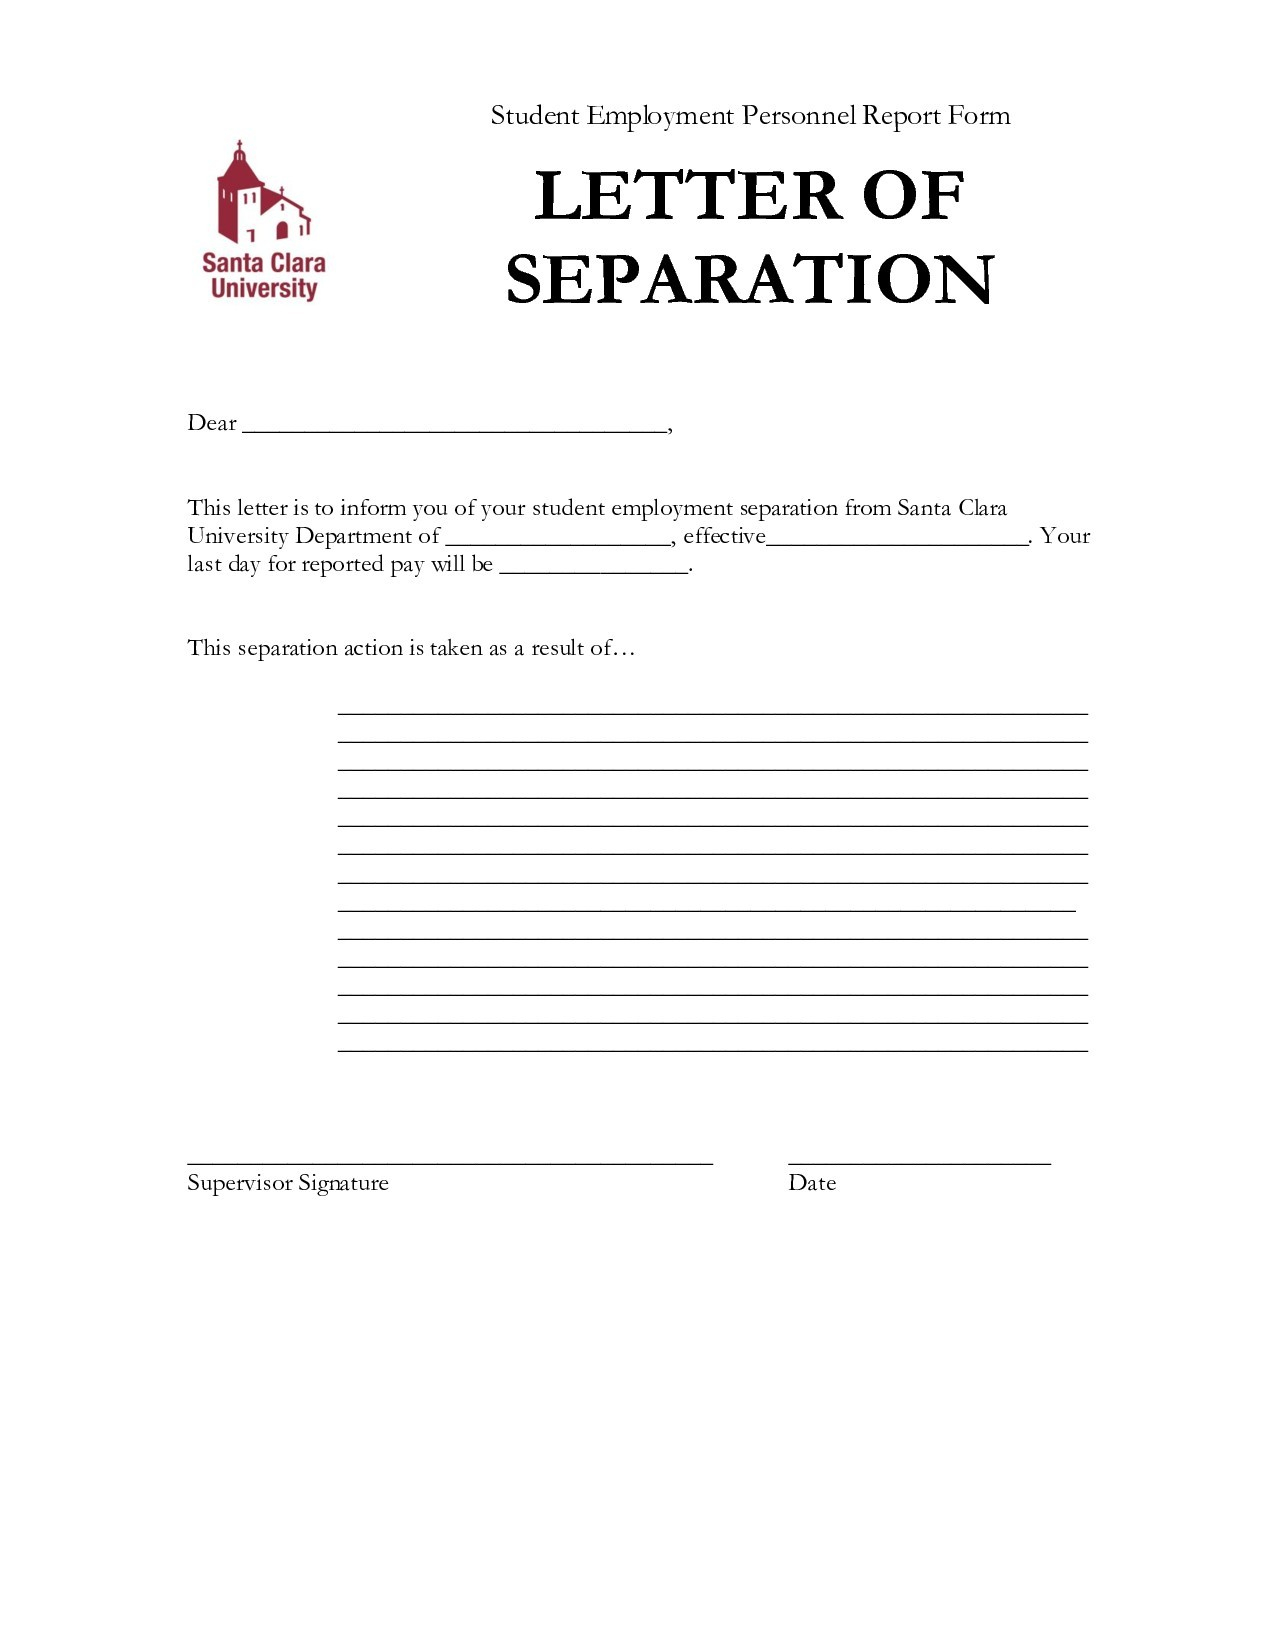 employment-separation-certificate-instructions